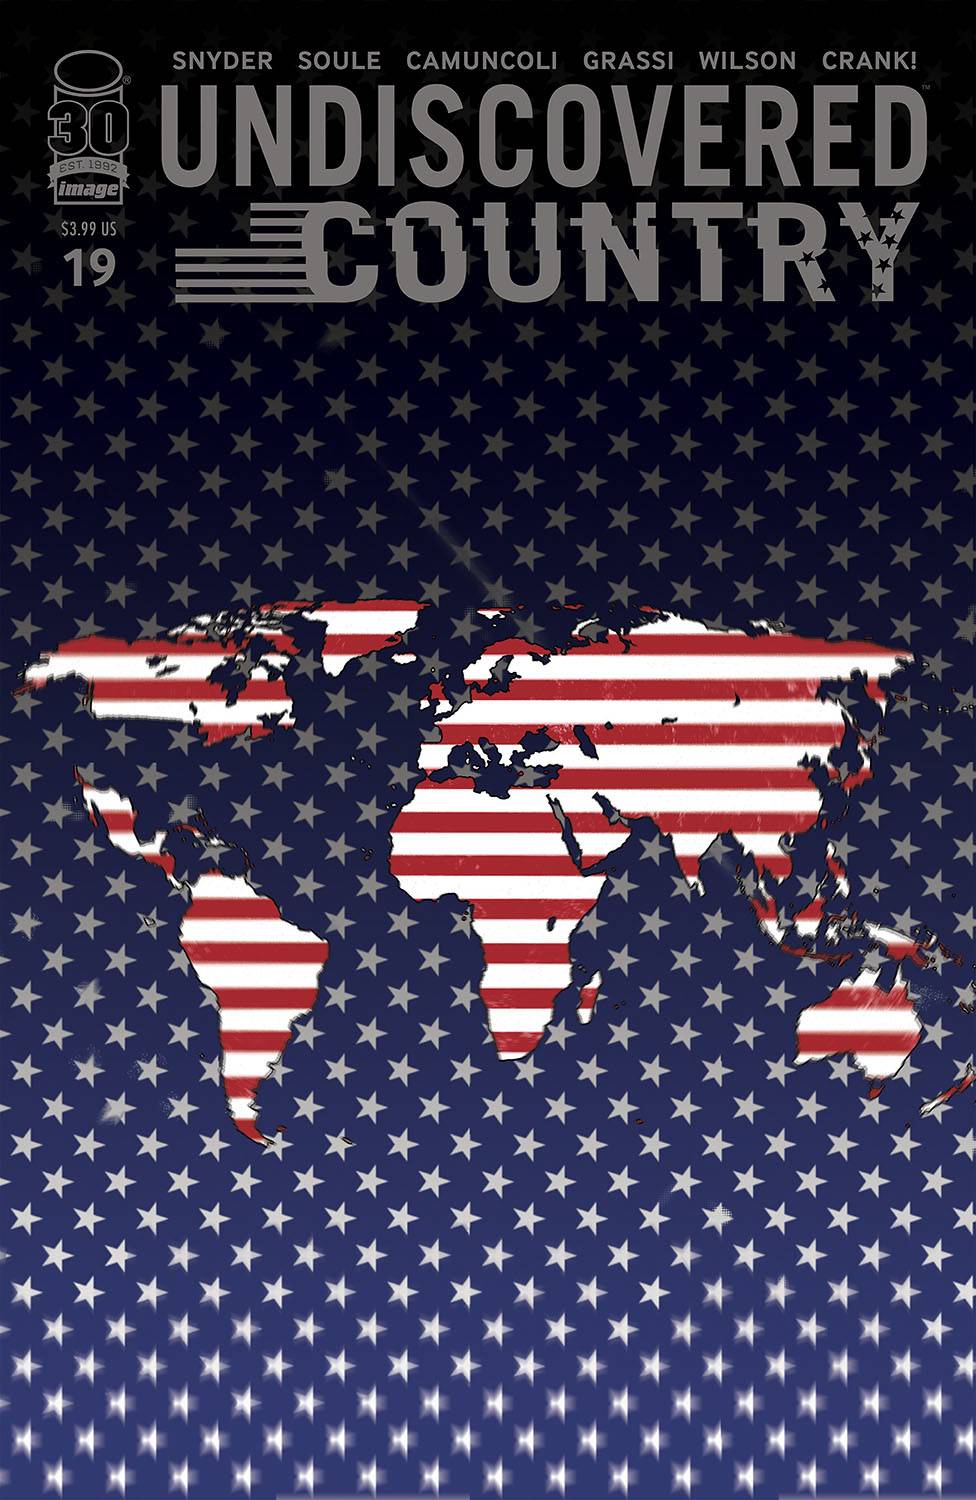 America The Greatest Country in the World Design | Poster